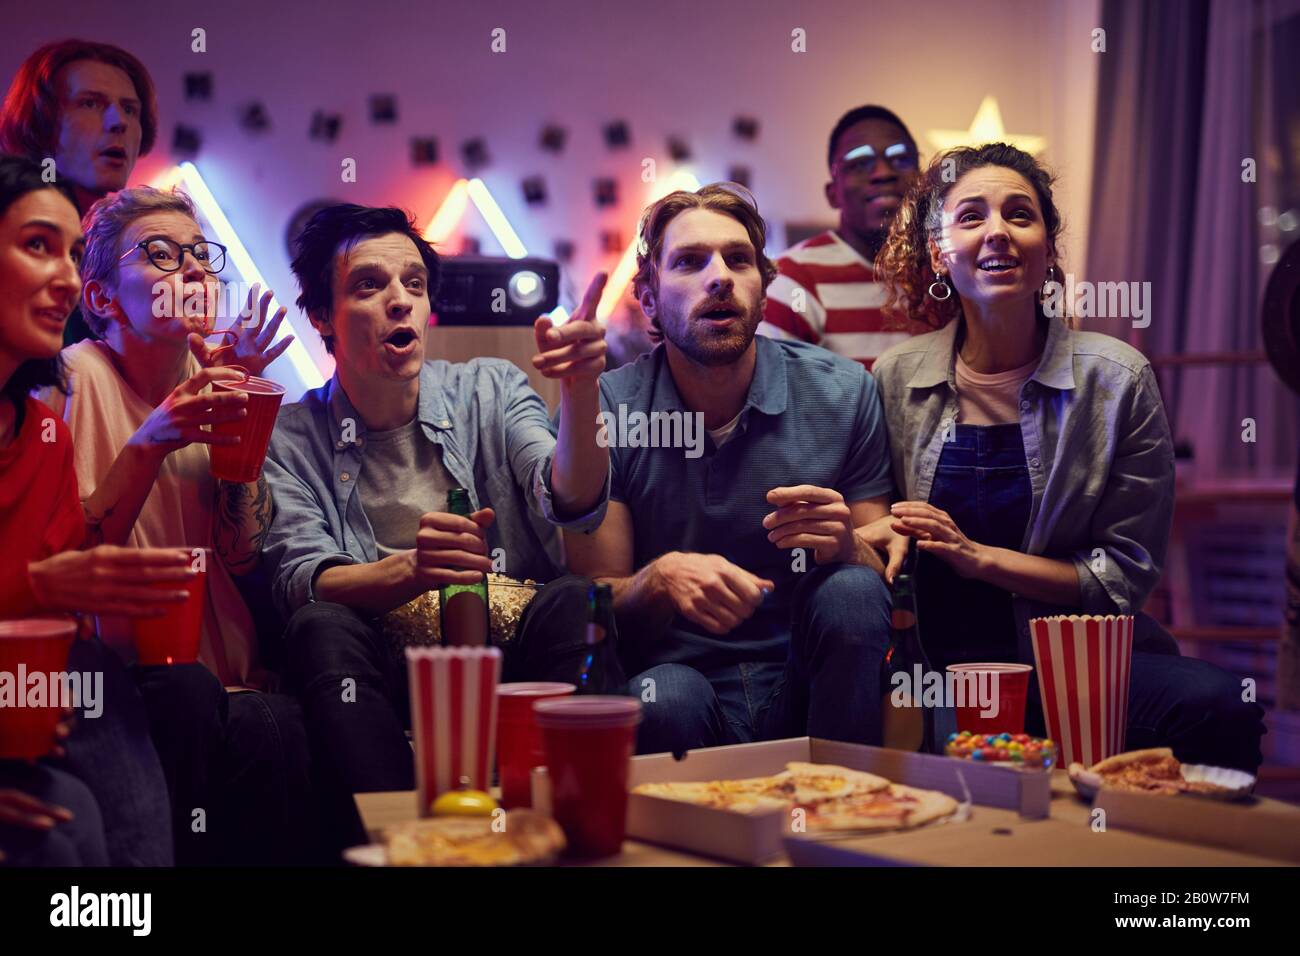 Group of young people sitting on sofa eating pizza and popcorn and watching a movie together during home party Stock Photo